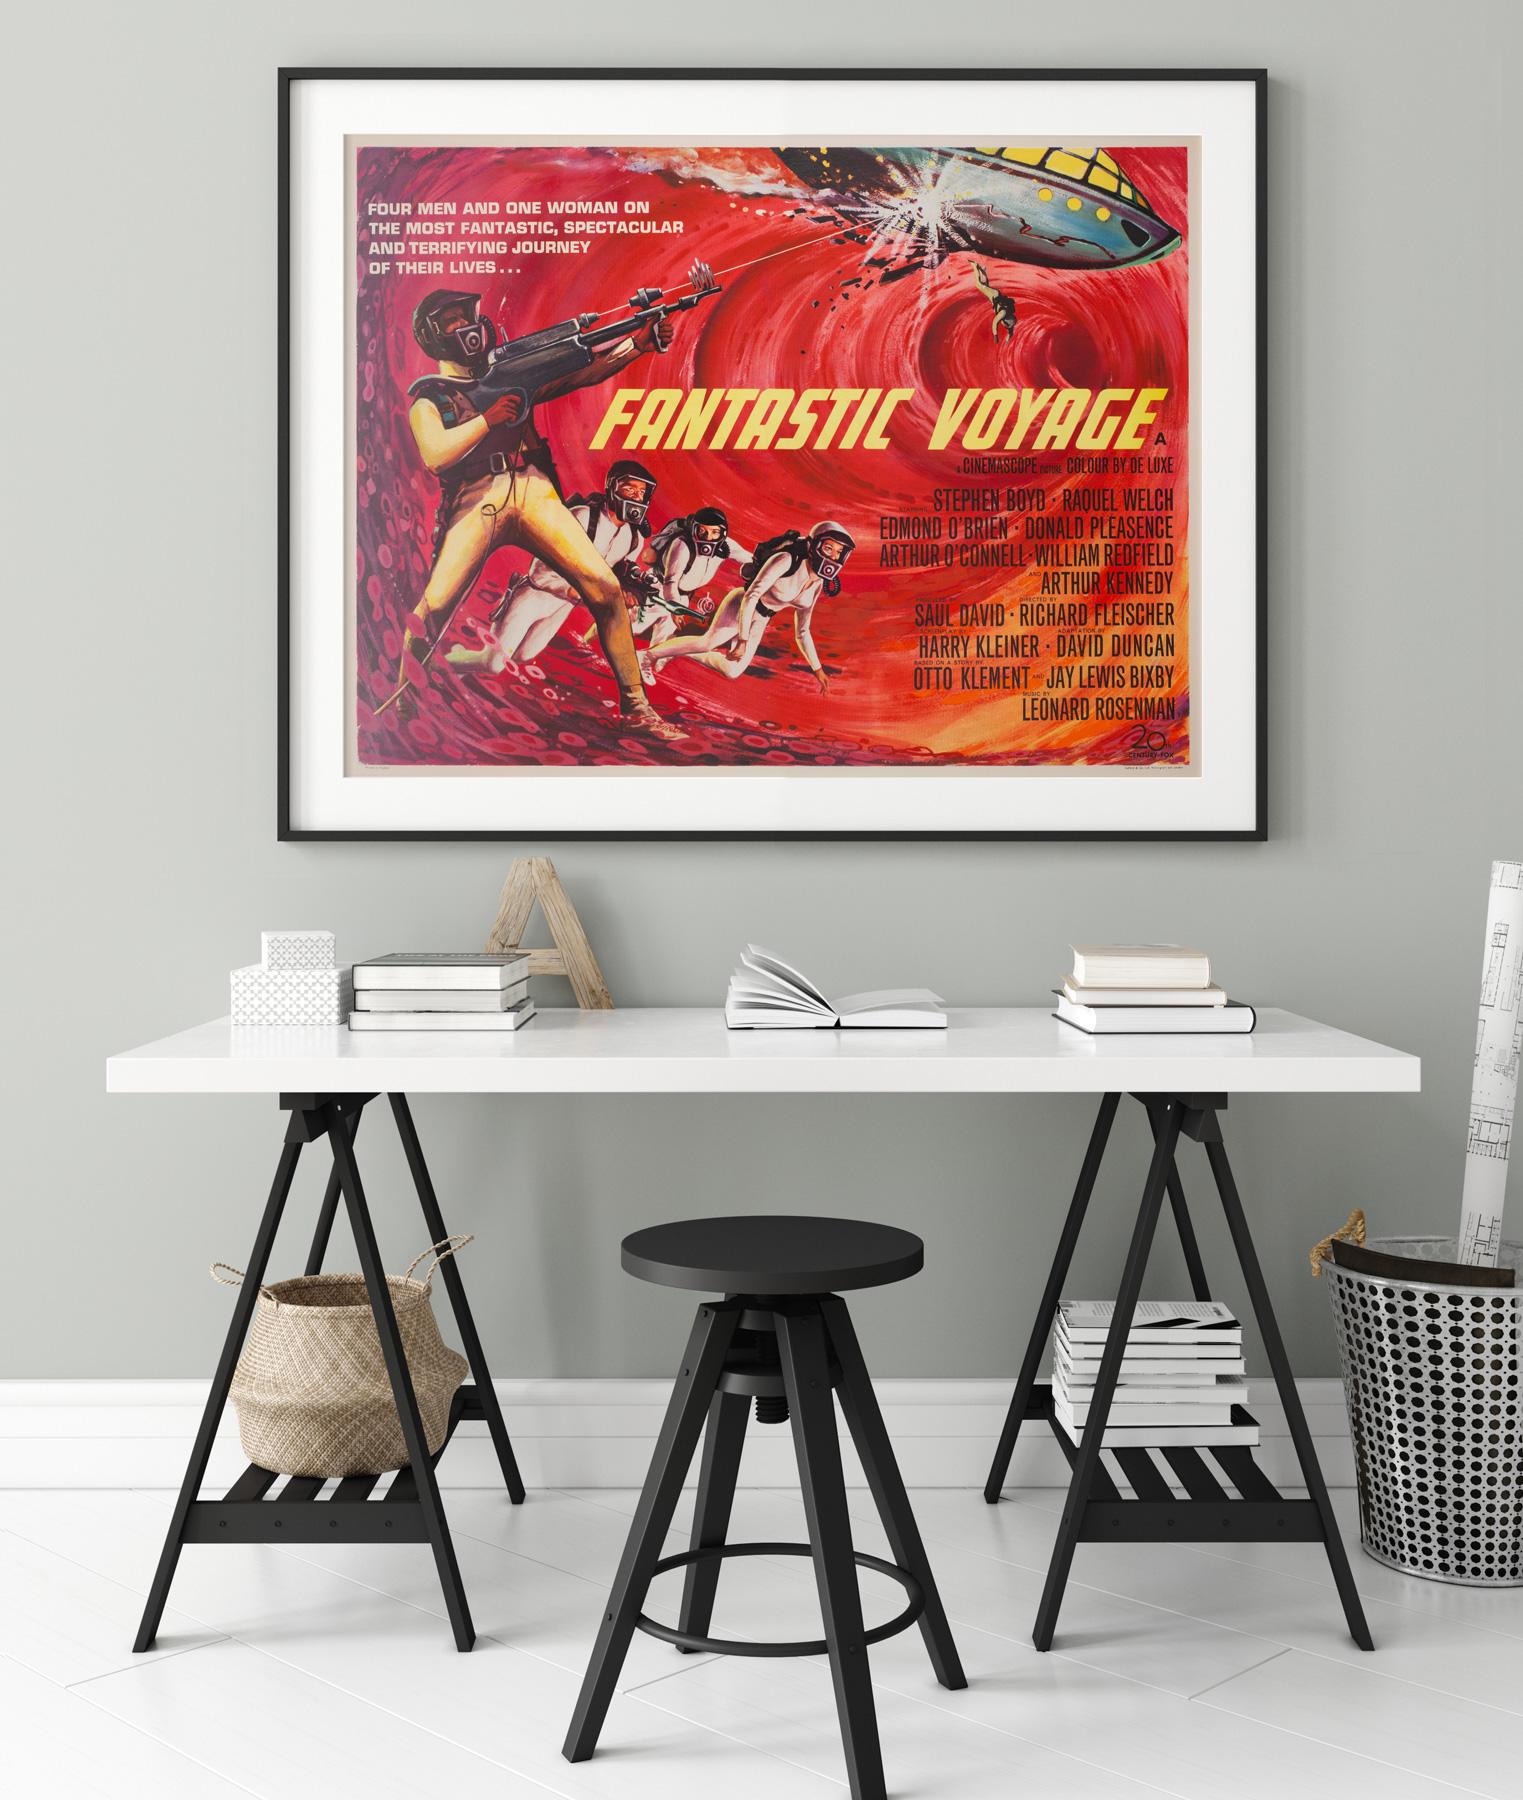 Fantastic Voyage film, movie poster, 1966, Tom Beauvais

Rich and sumptuous artwork by Beauvais for 1960s entertaining sci-fi film fantastic voyage. A striking vintage movie poster that is sure to liven up any room it's hung in.

This vintage